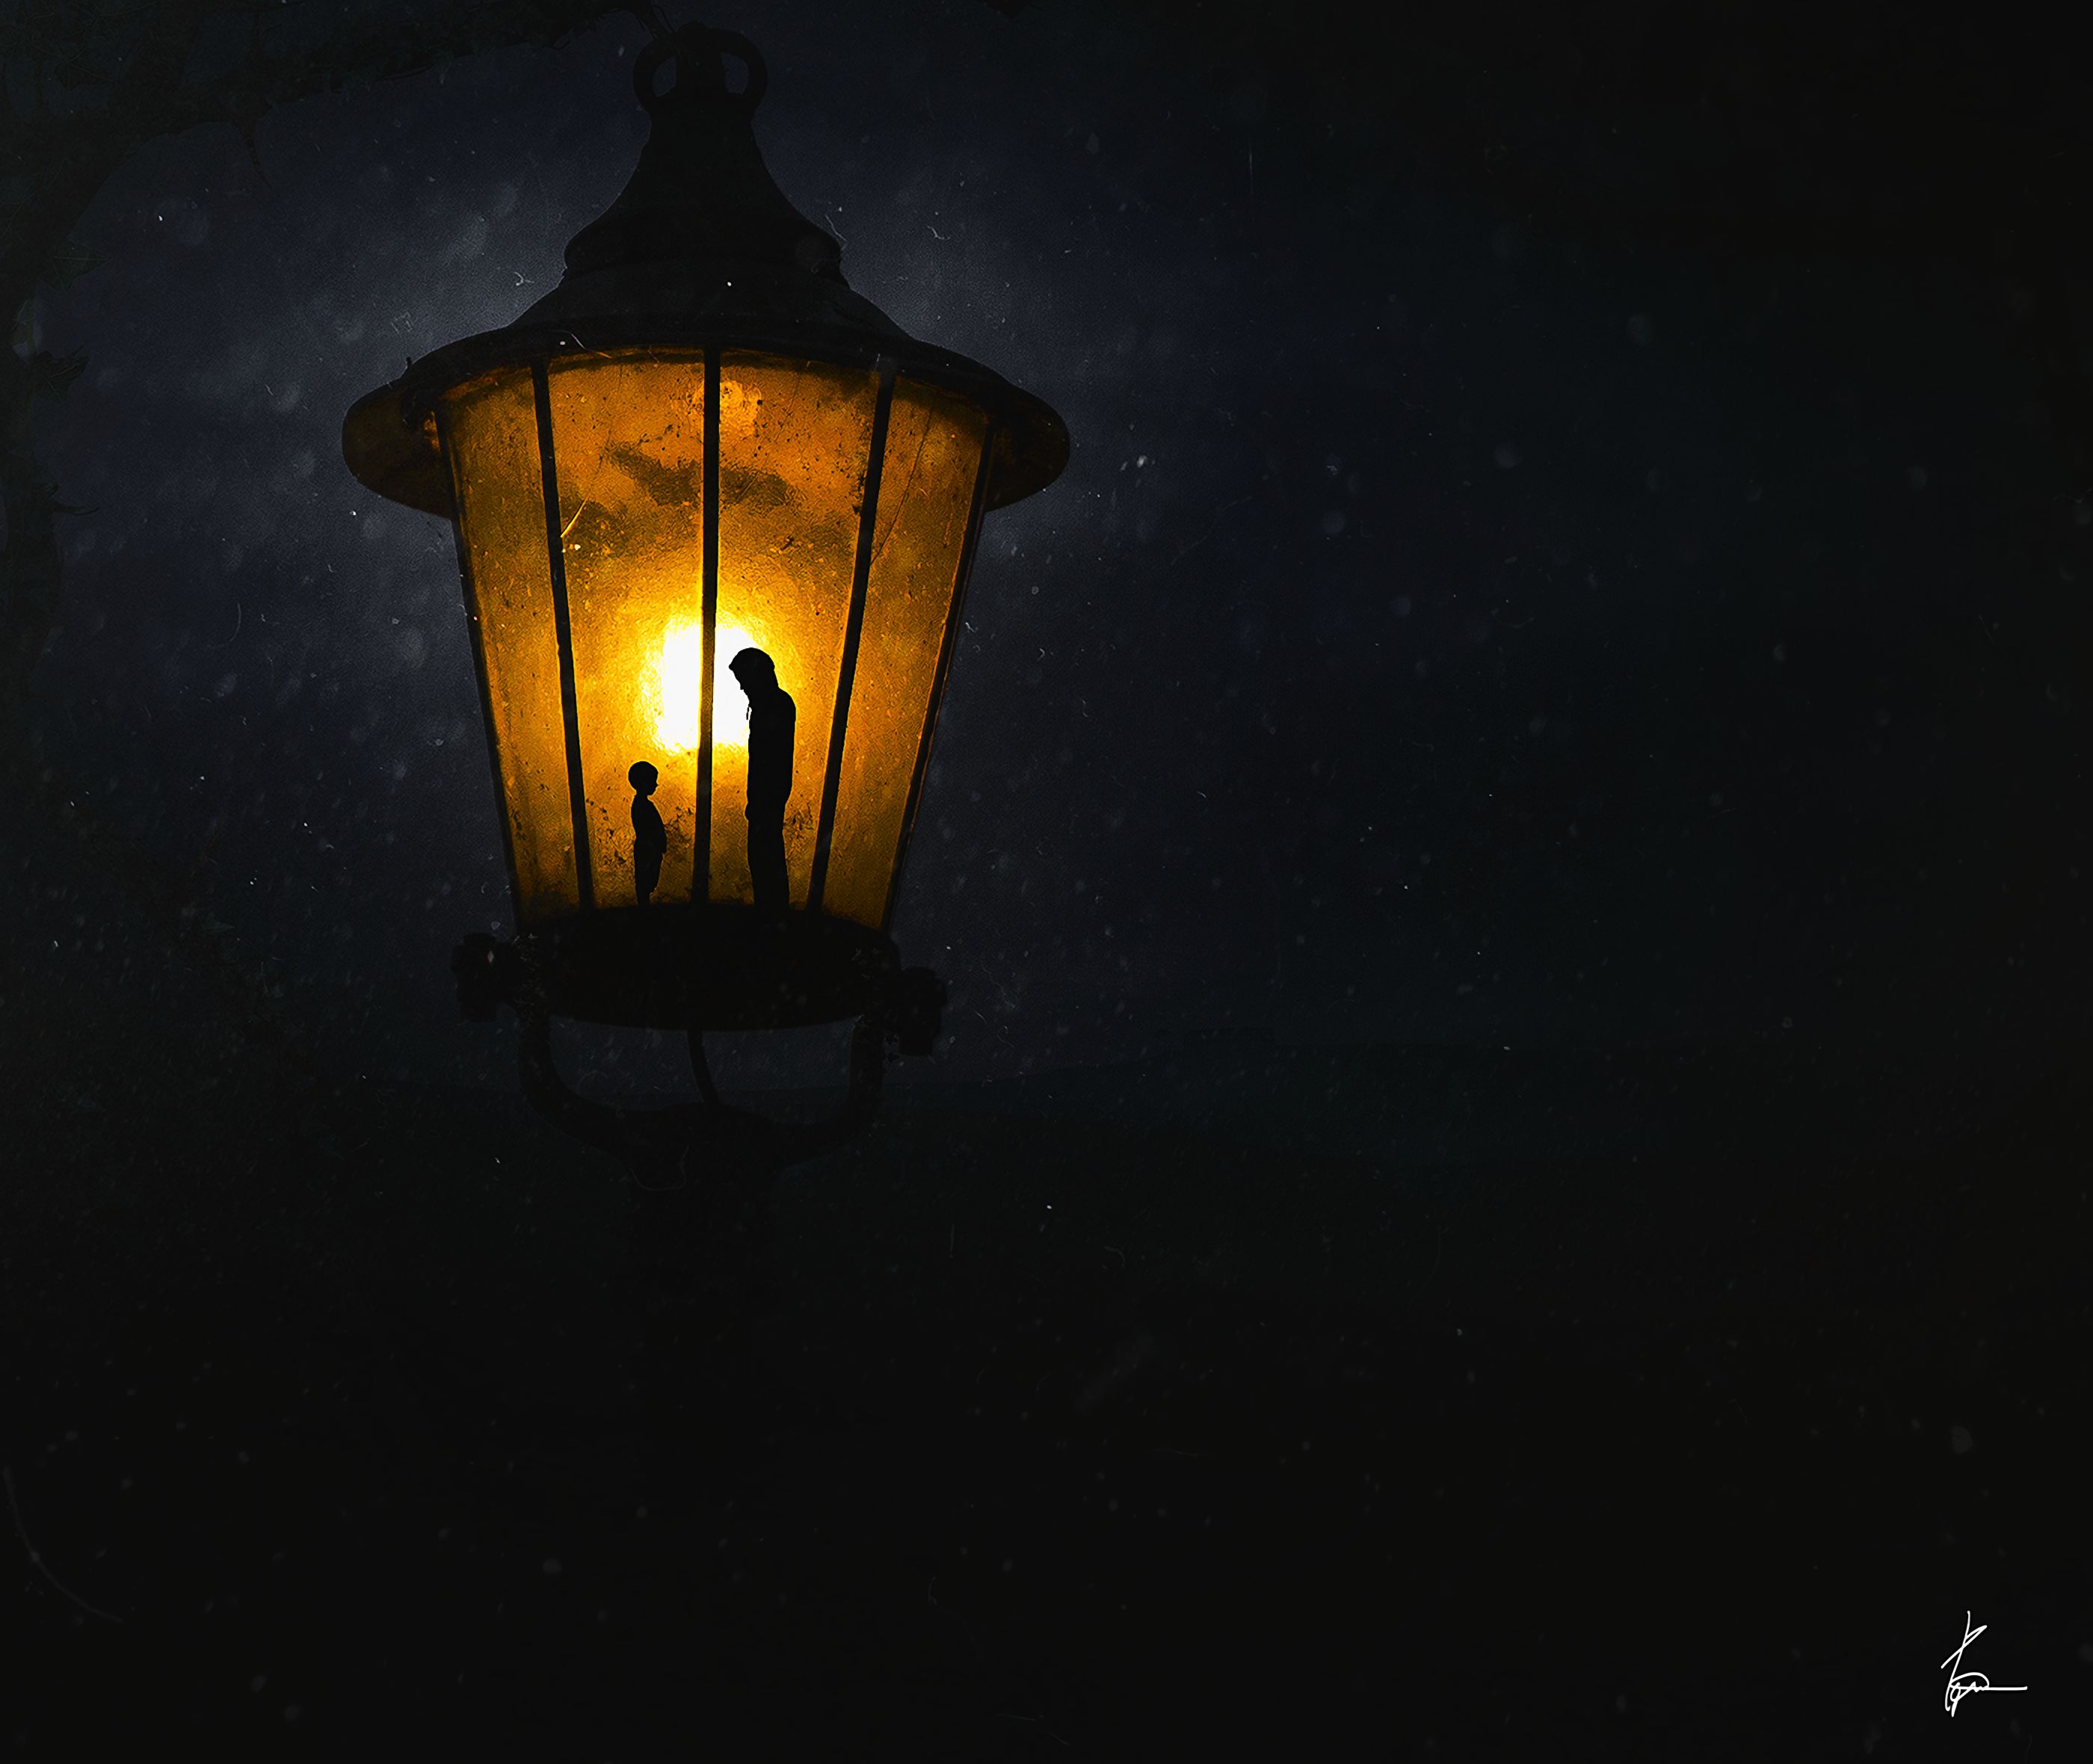 lamp, photoshop, dark, silhouettes cell phone wallpapers